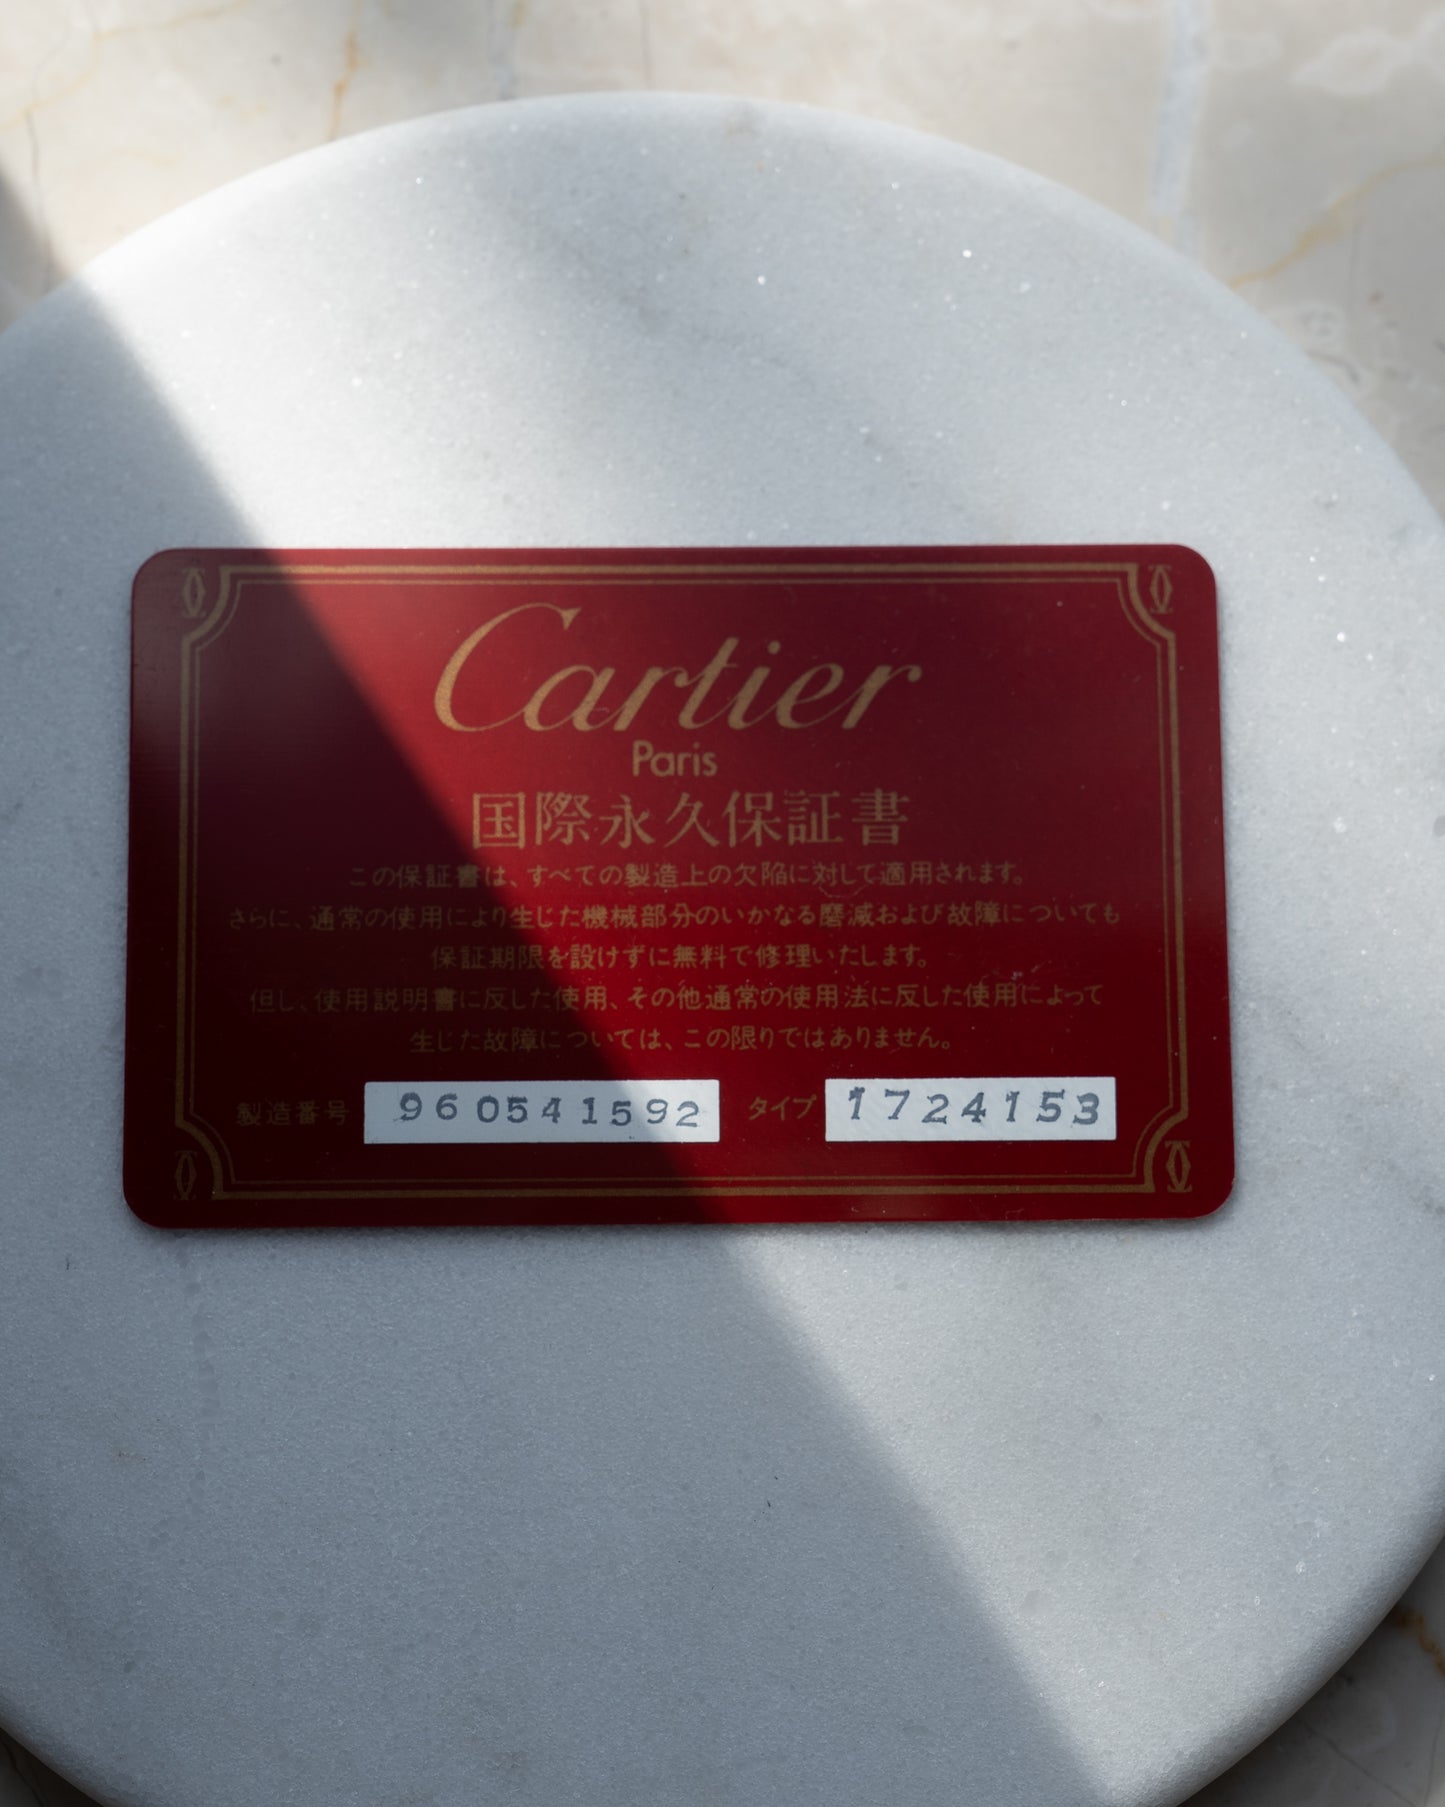 Cartier Santos-Dumont "Ultra Thin" LM size in 18k Yellow Gold with lifetime guarantee card, box & papers